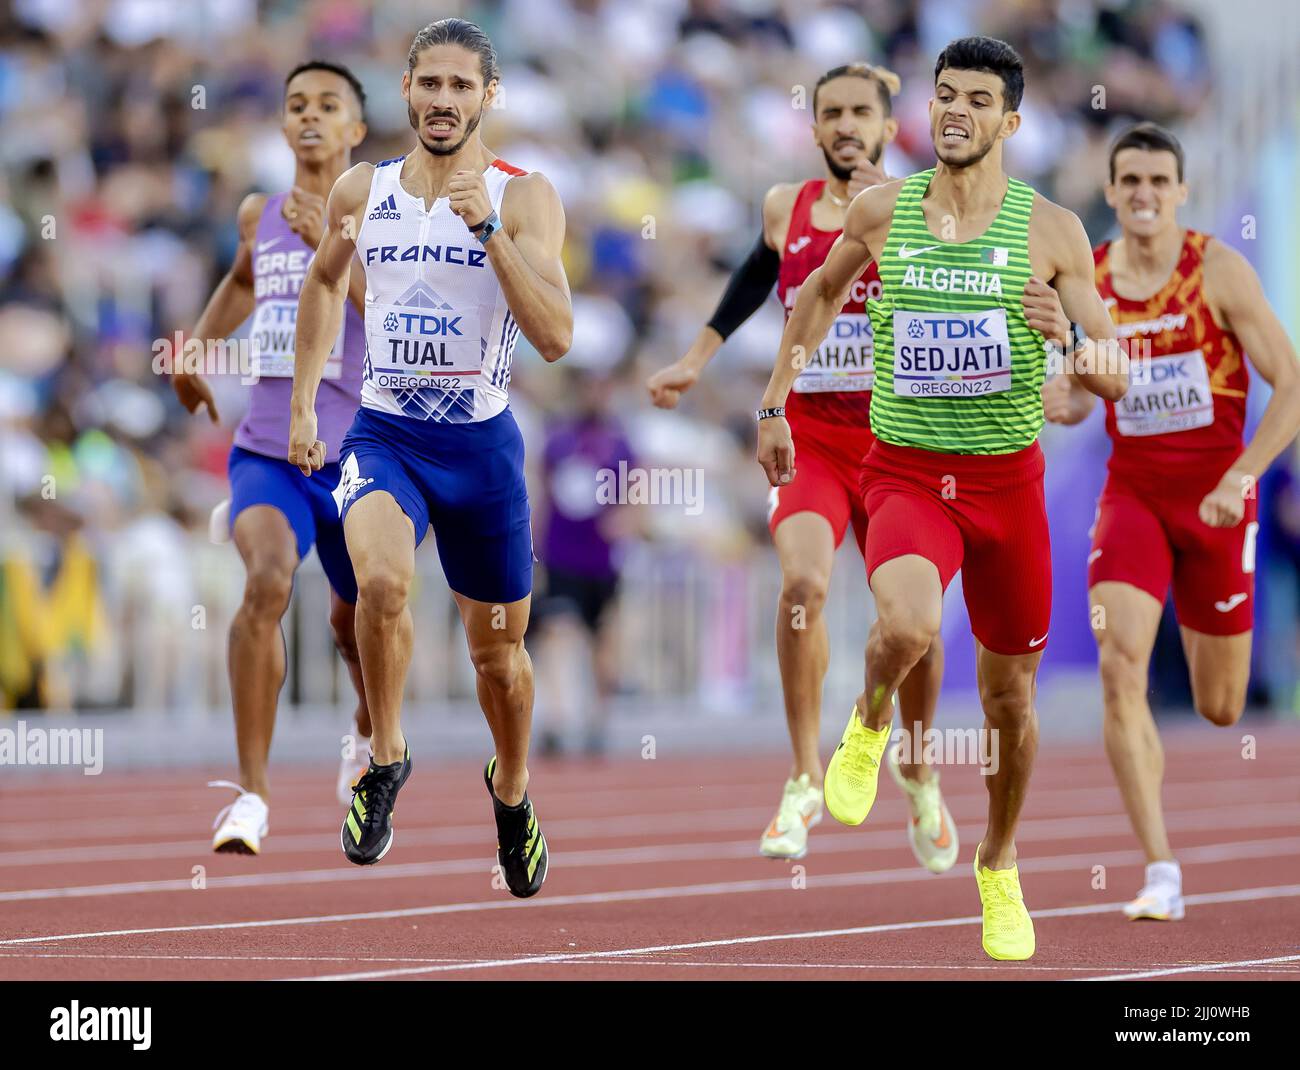 2022-07-22 04:10:44 EUGENE - Gabriel Tual (FRA) in action during the 800 meters semifinal on the seventh day of the World Athletics Championships at Hayward Field stadium. ANP ROBIN VAN LONKHUIJSEN netherlands out - belgium out Stock Photo